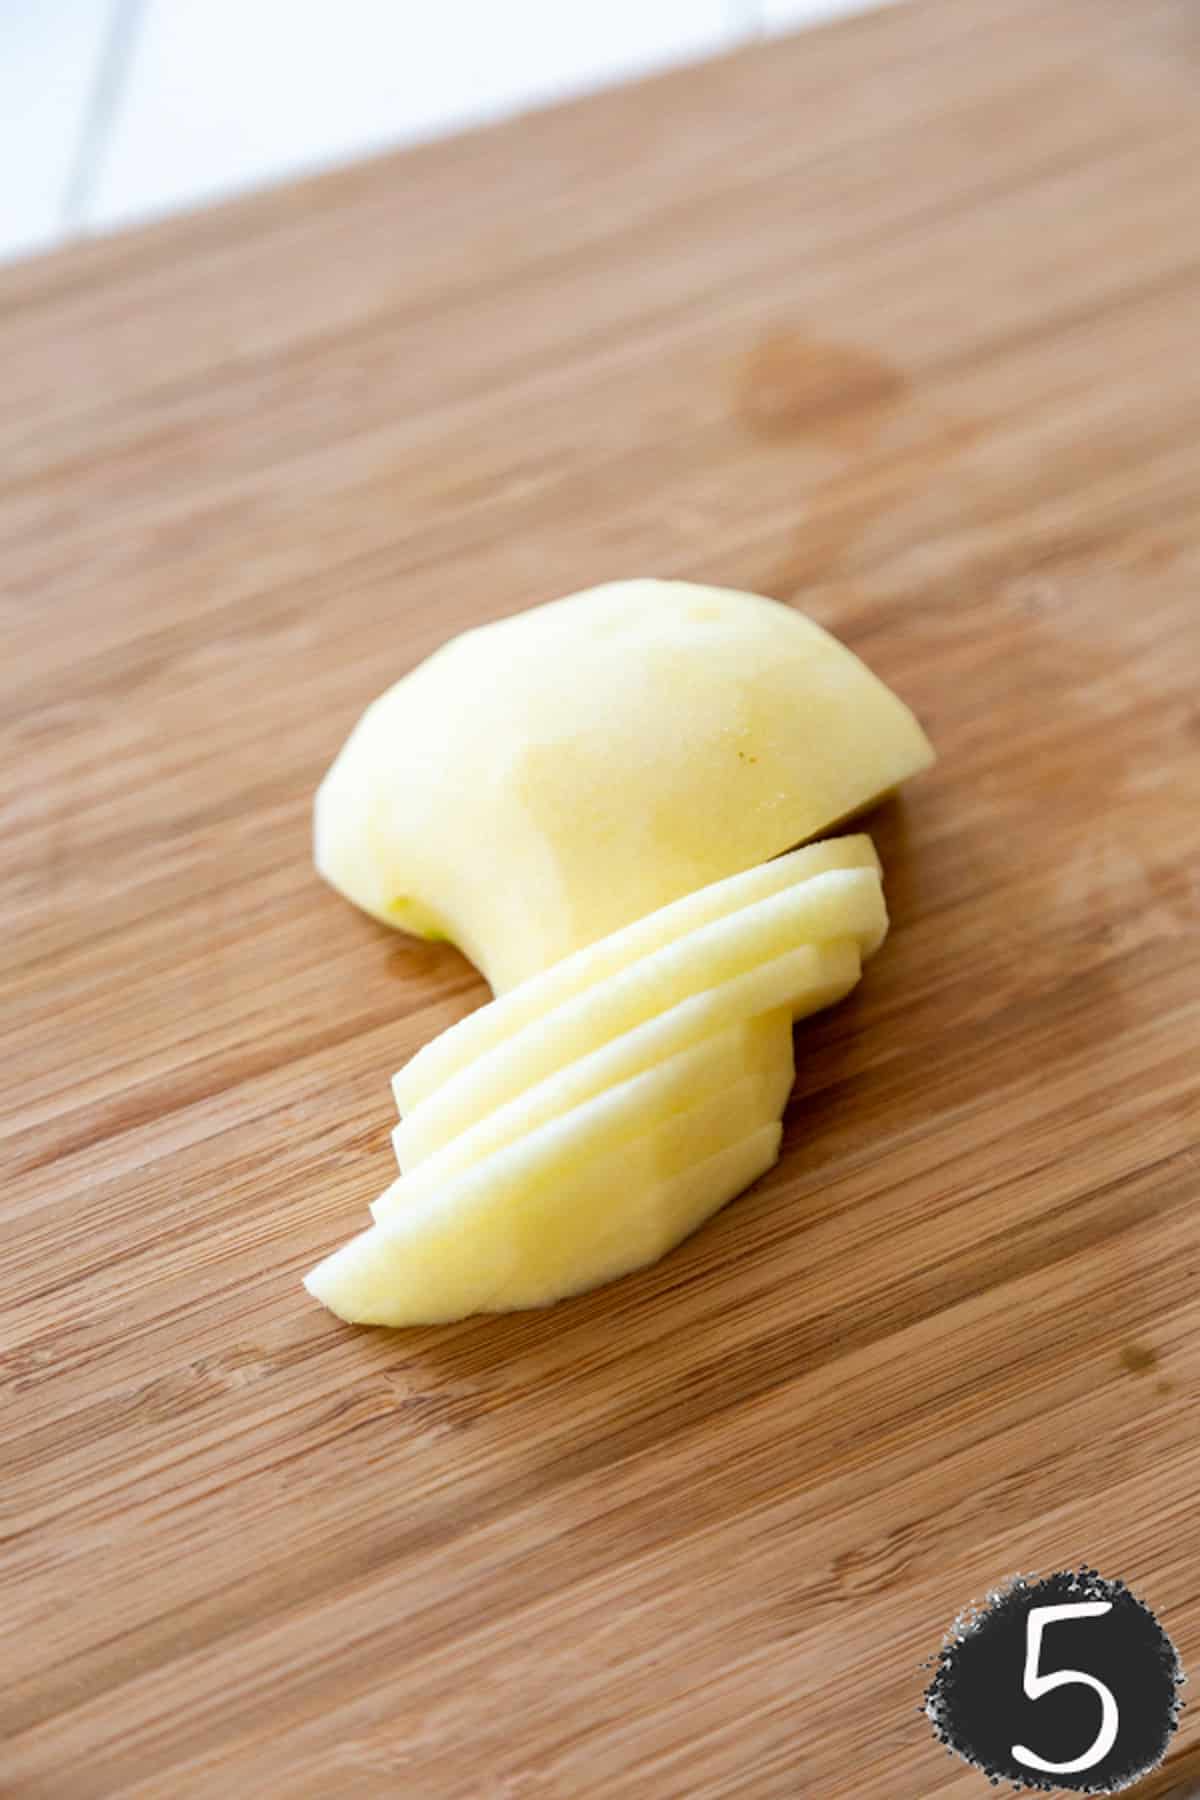 Peeled apple slices on a wooden board.